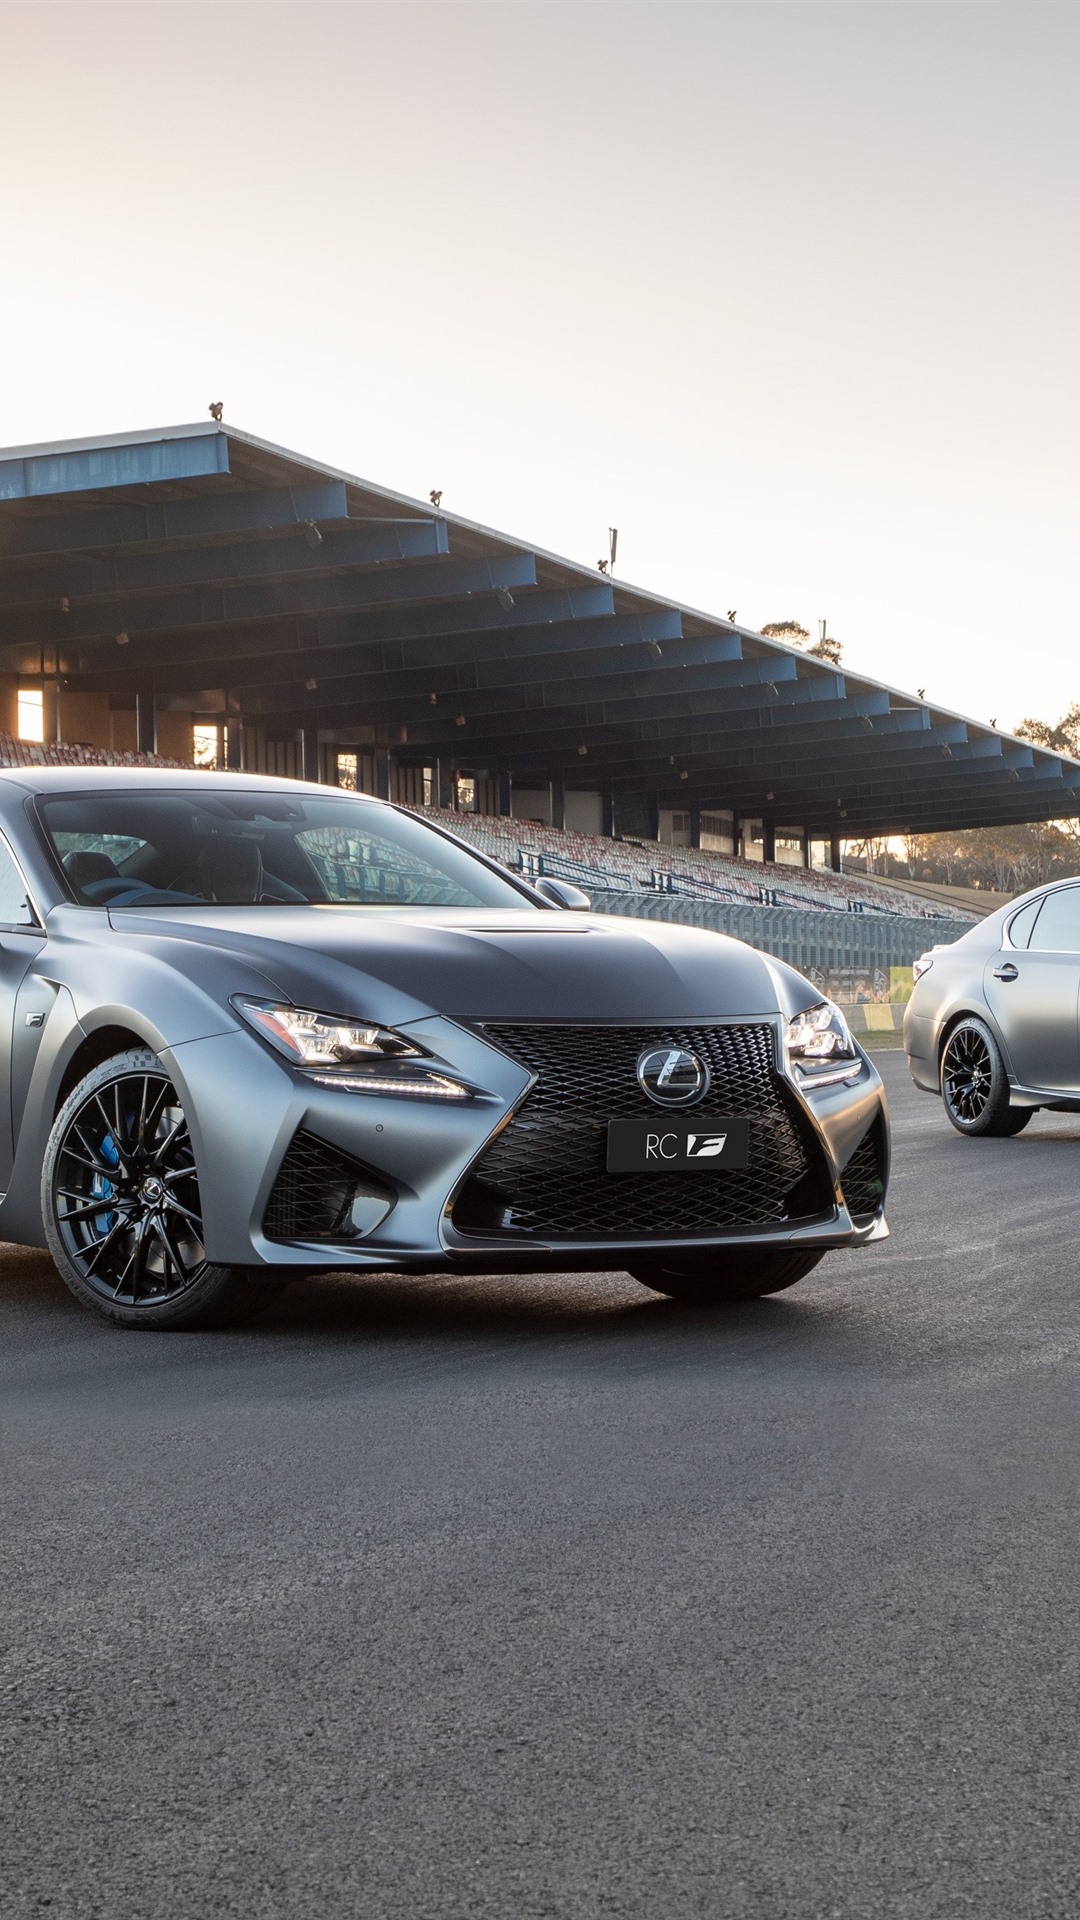 Iphone Wallpaper Lexus Rc And Gs Silver Cars Lexus Rcf Limited Edition 1080x19 Wallpaper Teahub Io